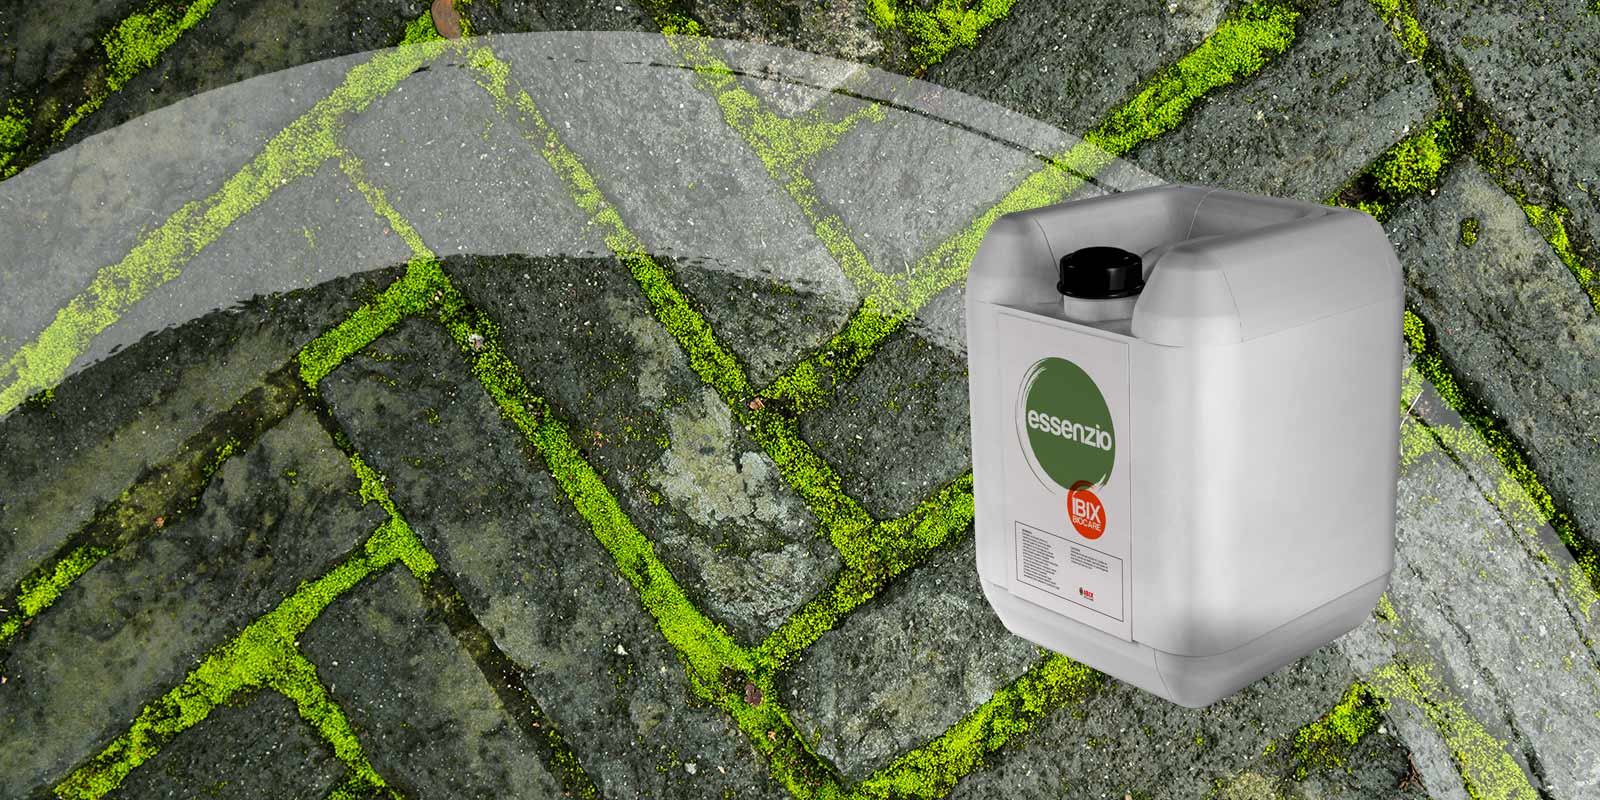 Essenzio is a Eco-friendly and Natural Moss Killer